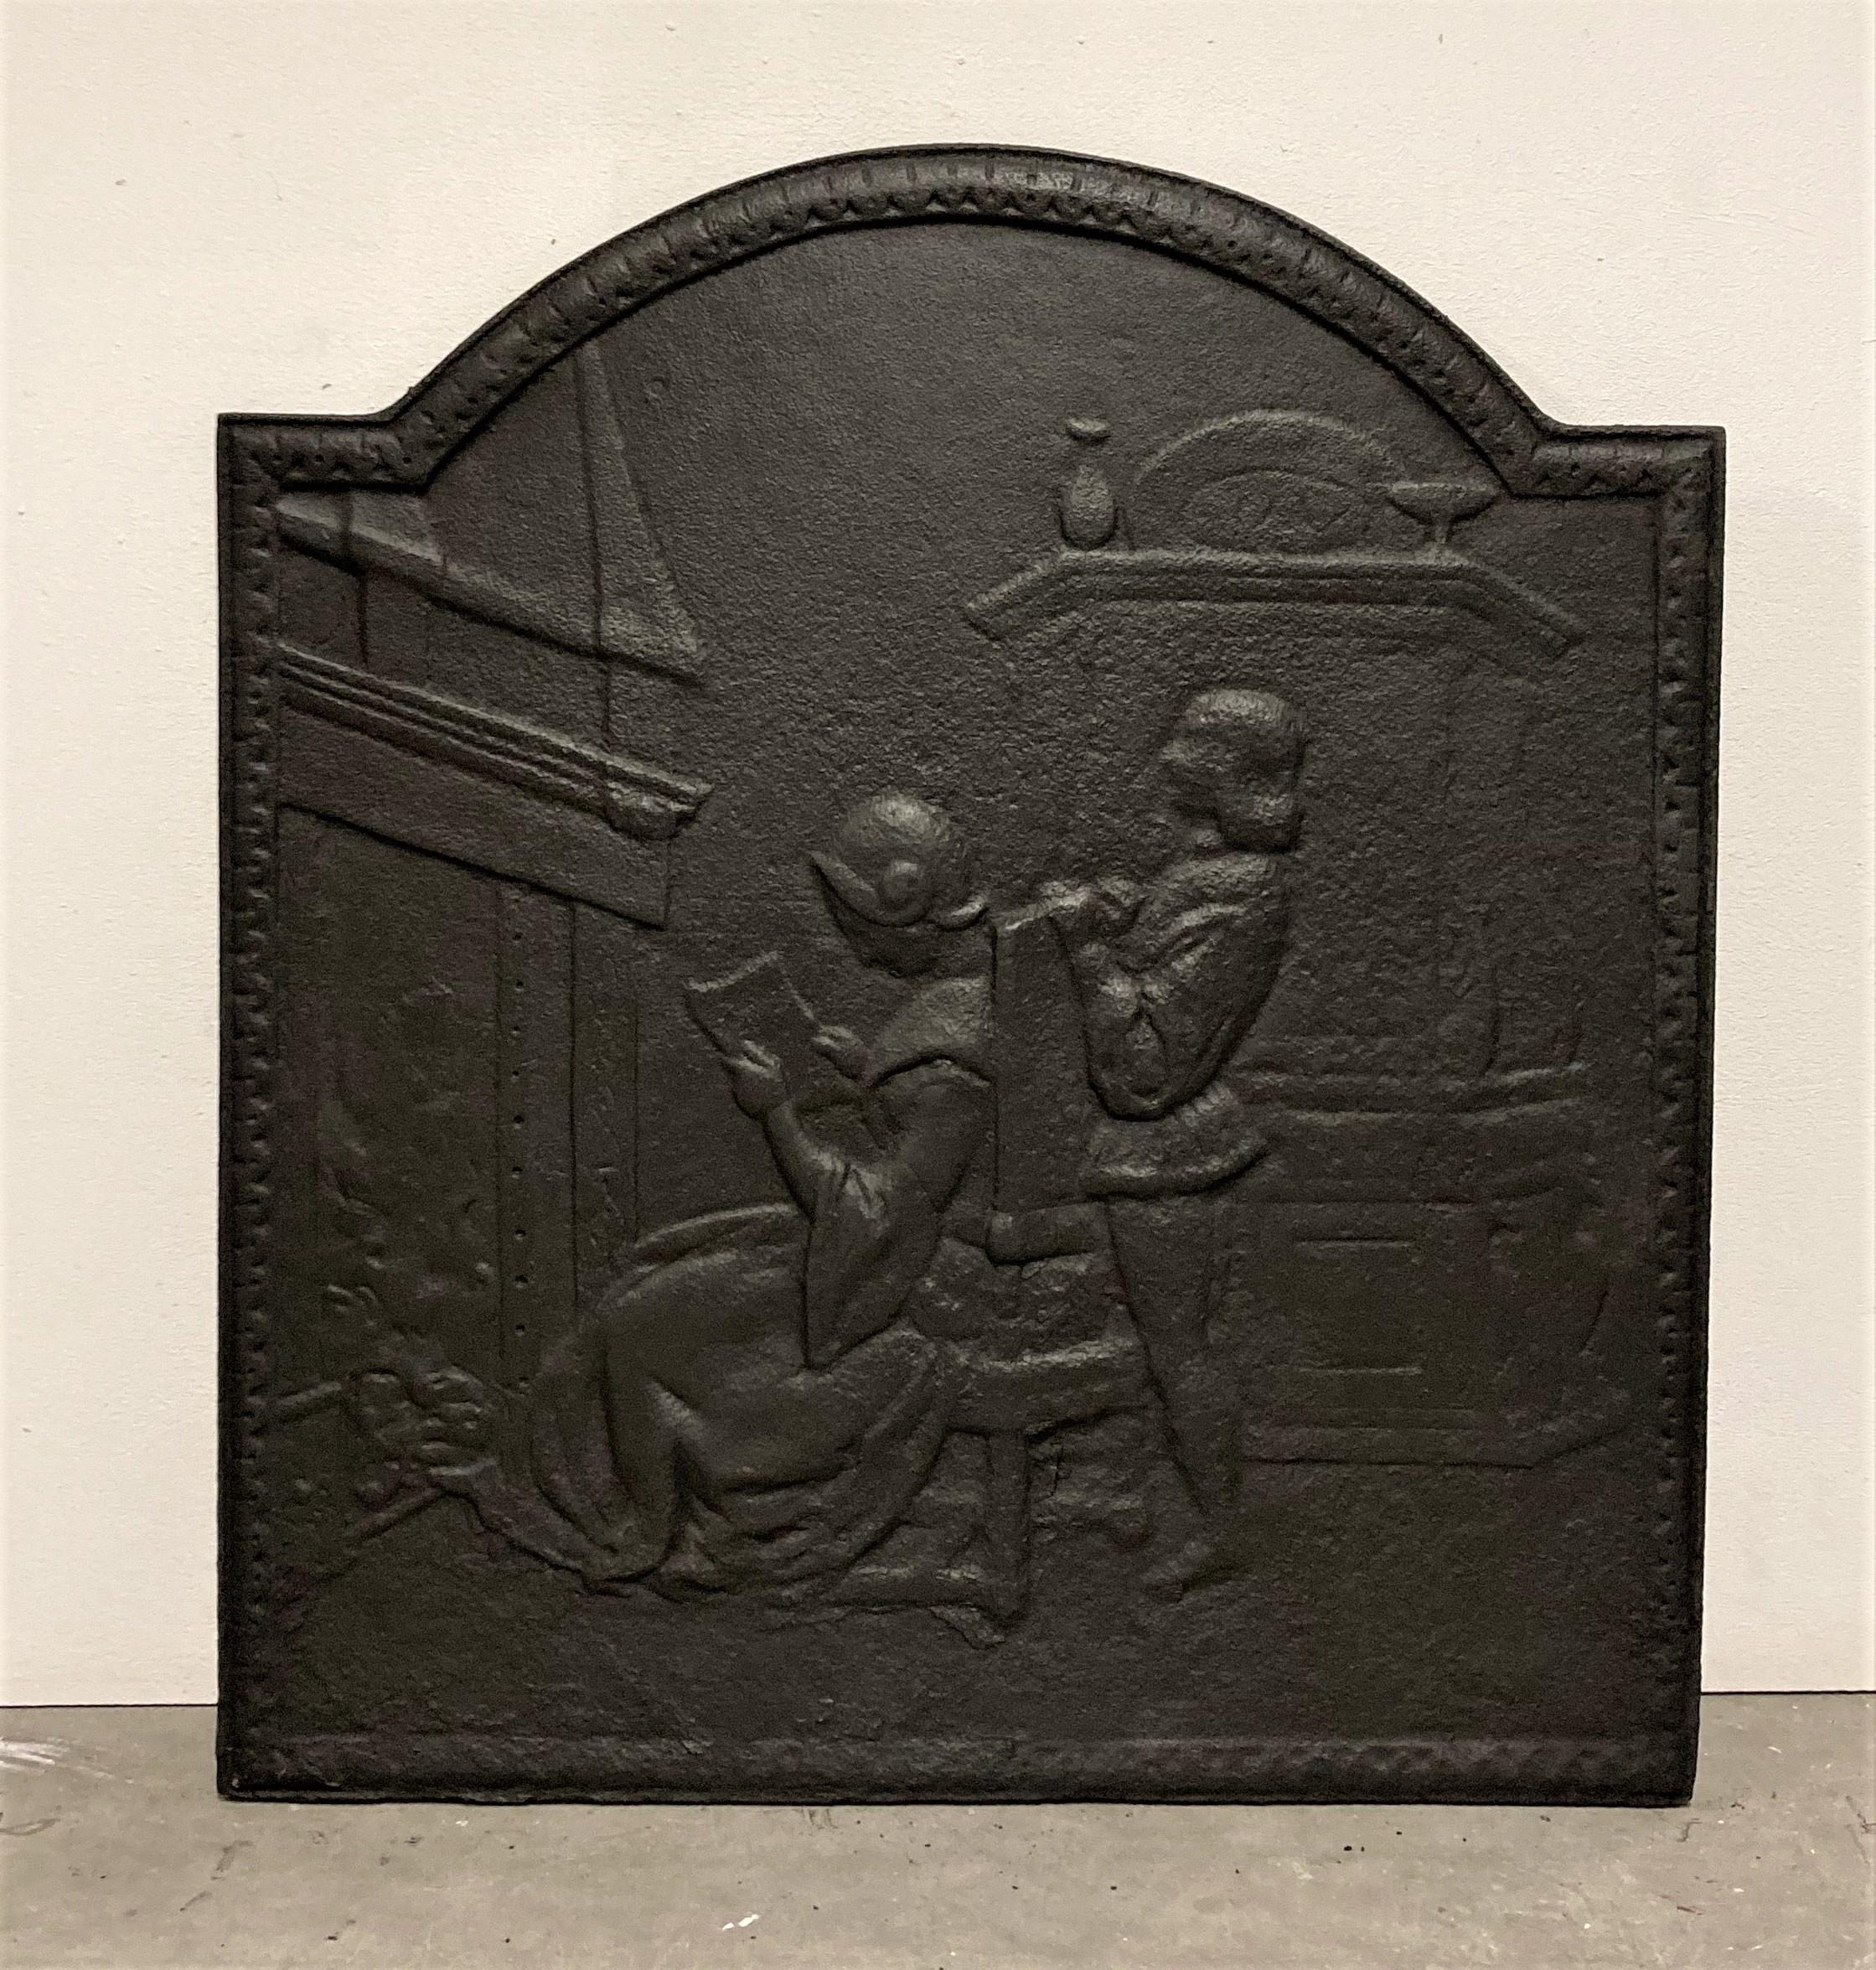 Nice sized 19th century cast iron fireback.
Showing a nice family scene, man standing behind his wife who is reading in front of the hearth.
Lovely warm welcoming and detailed fireback.

Great condition can be used in a real fire.
Sold by